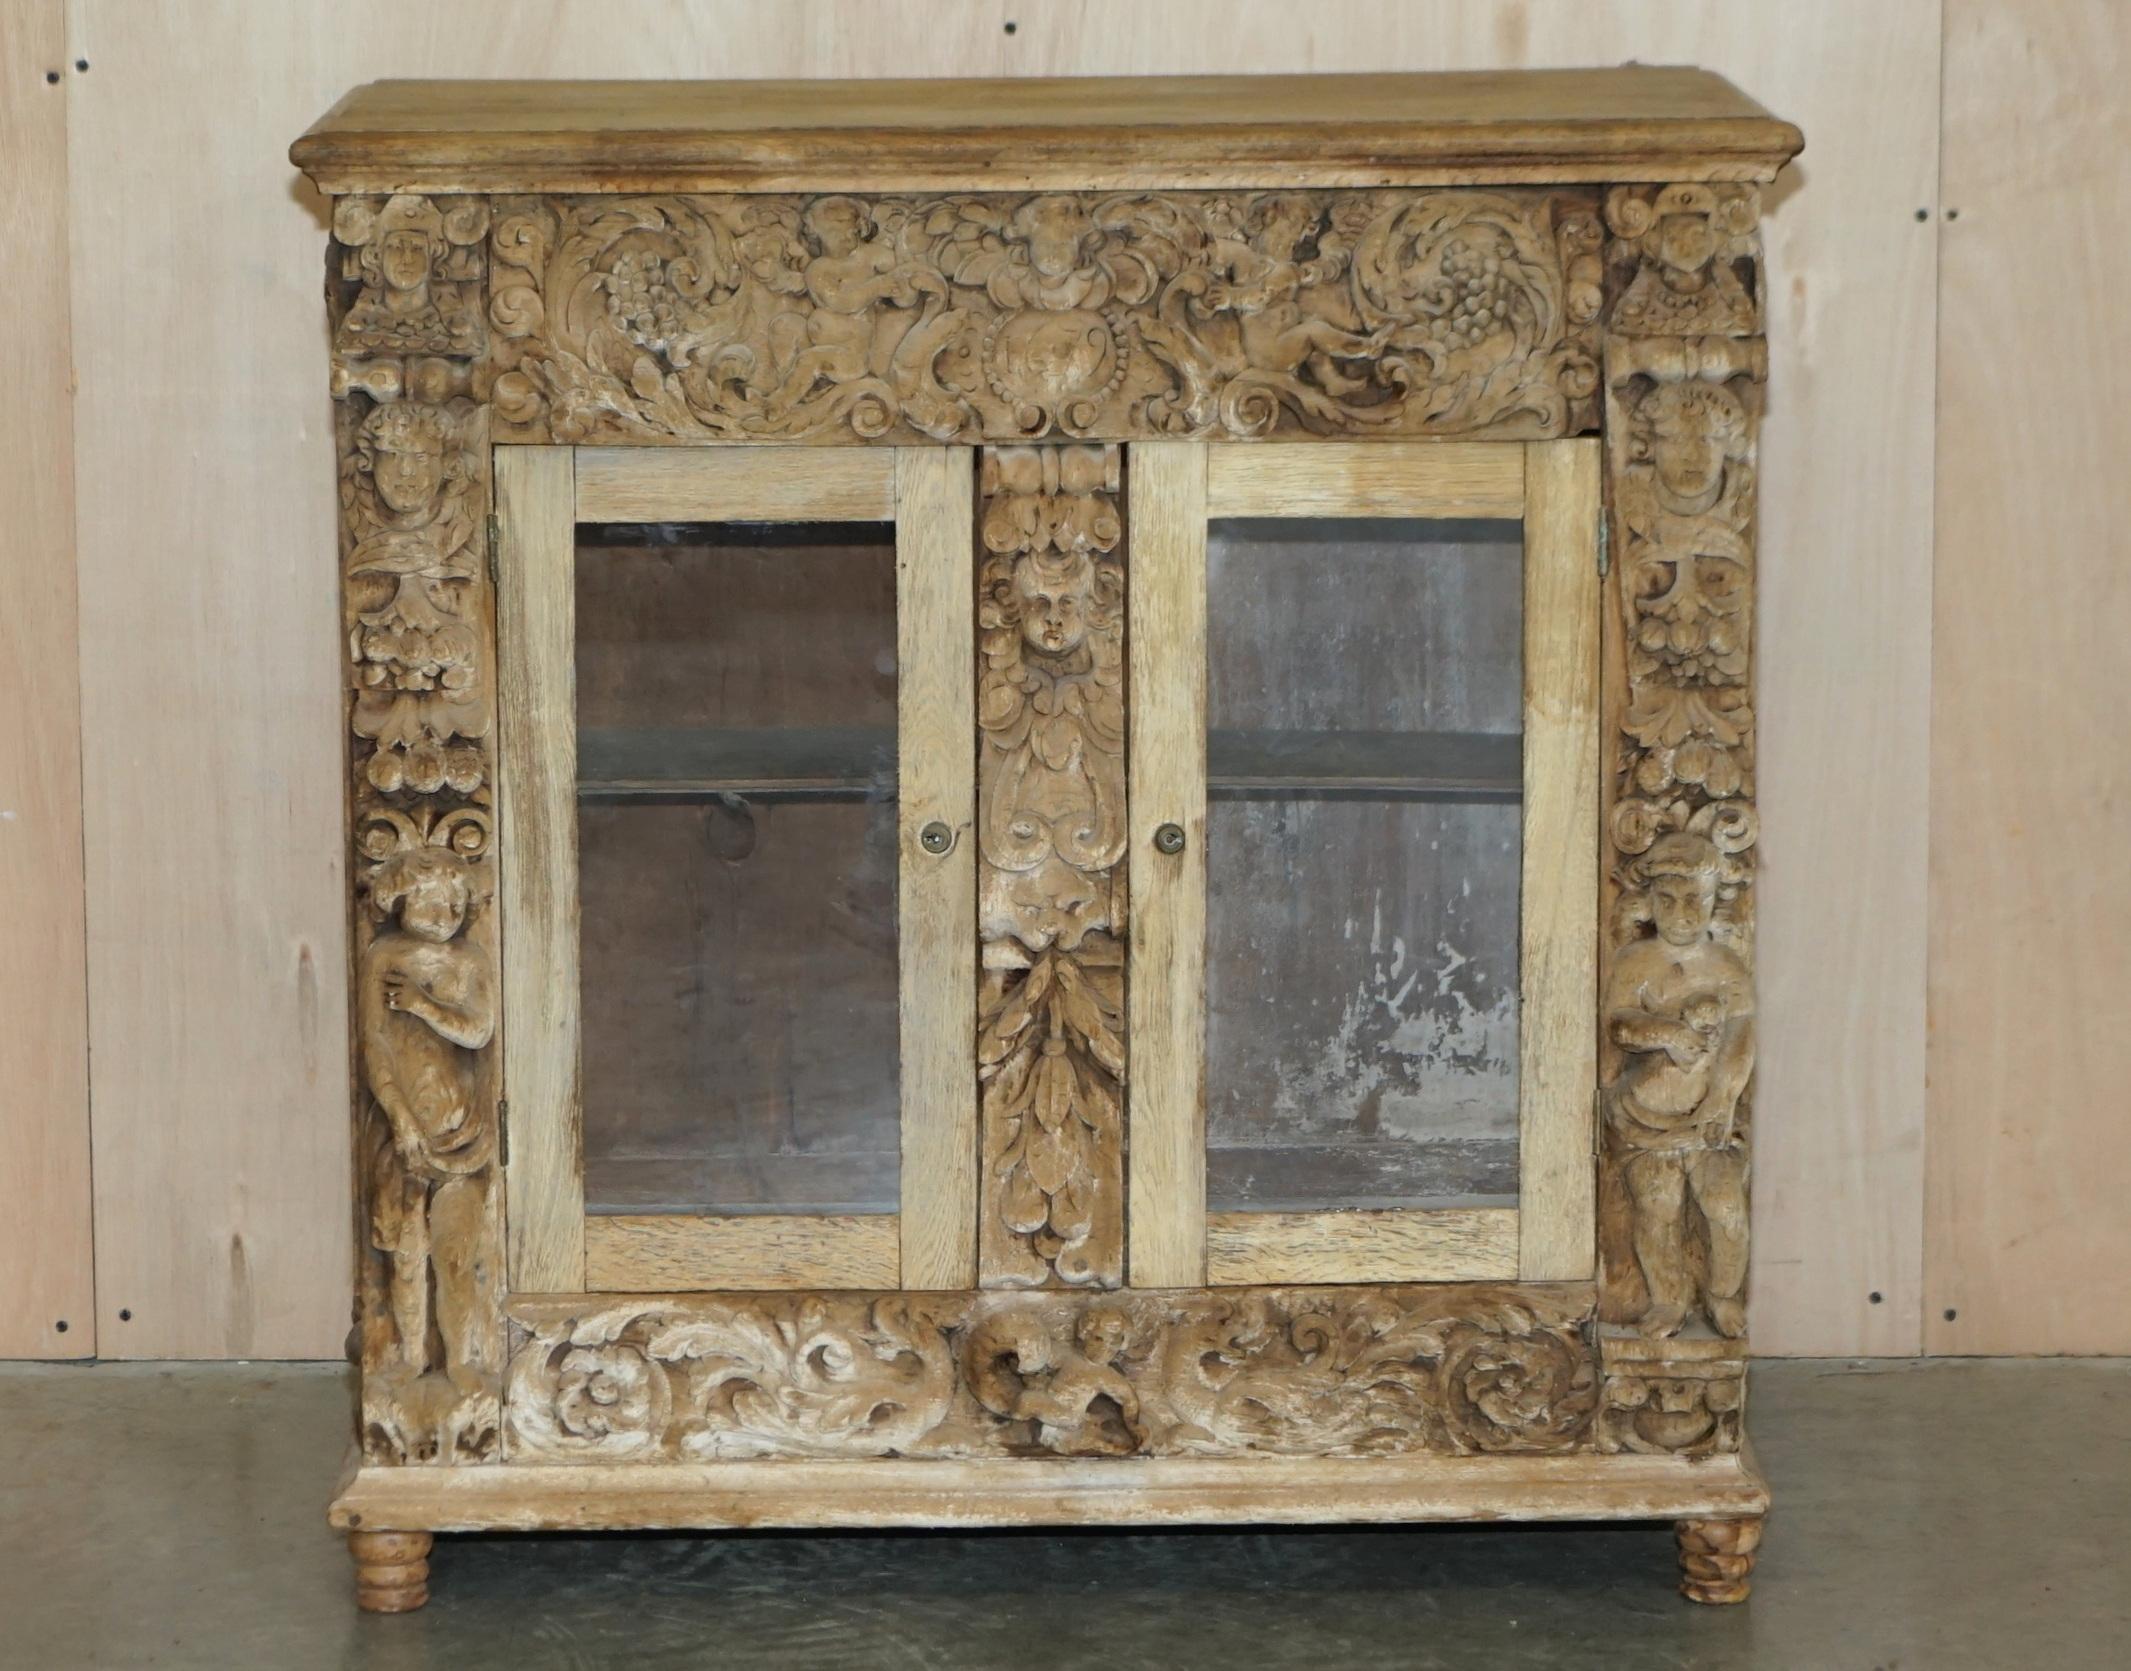 We are delighted to offer for sale this very rare and highly collectable, 1679 dated, Italian hand carved sideboard in bleached oak

A very good looking and decorative piece, it is heavily hand carved depicting cherubs, herms, grape vines and